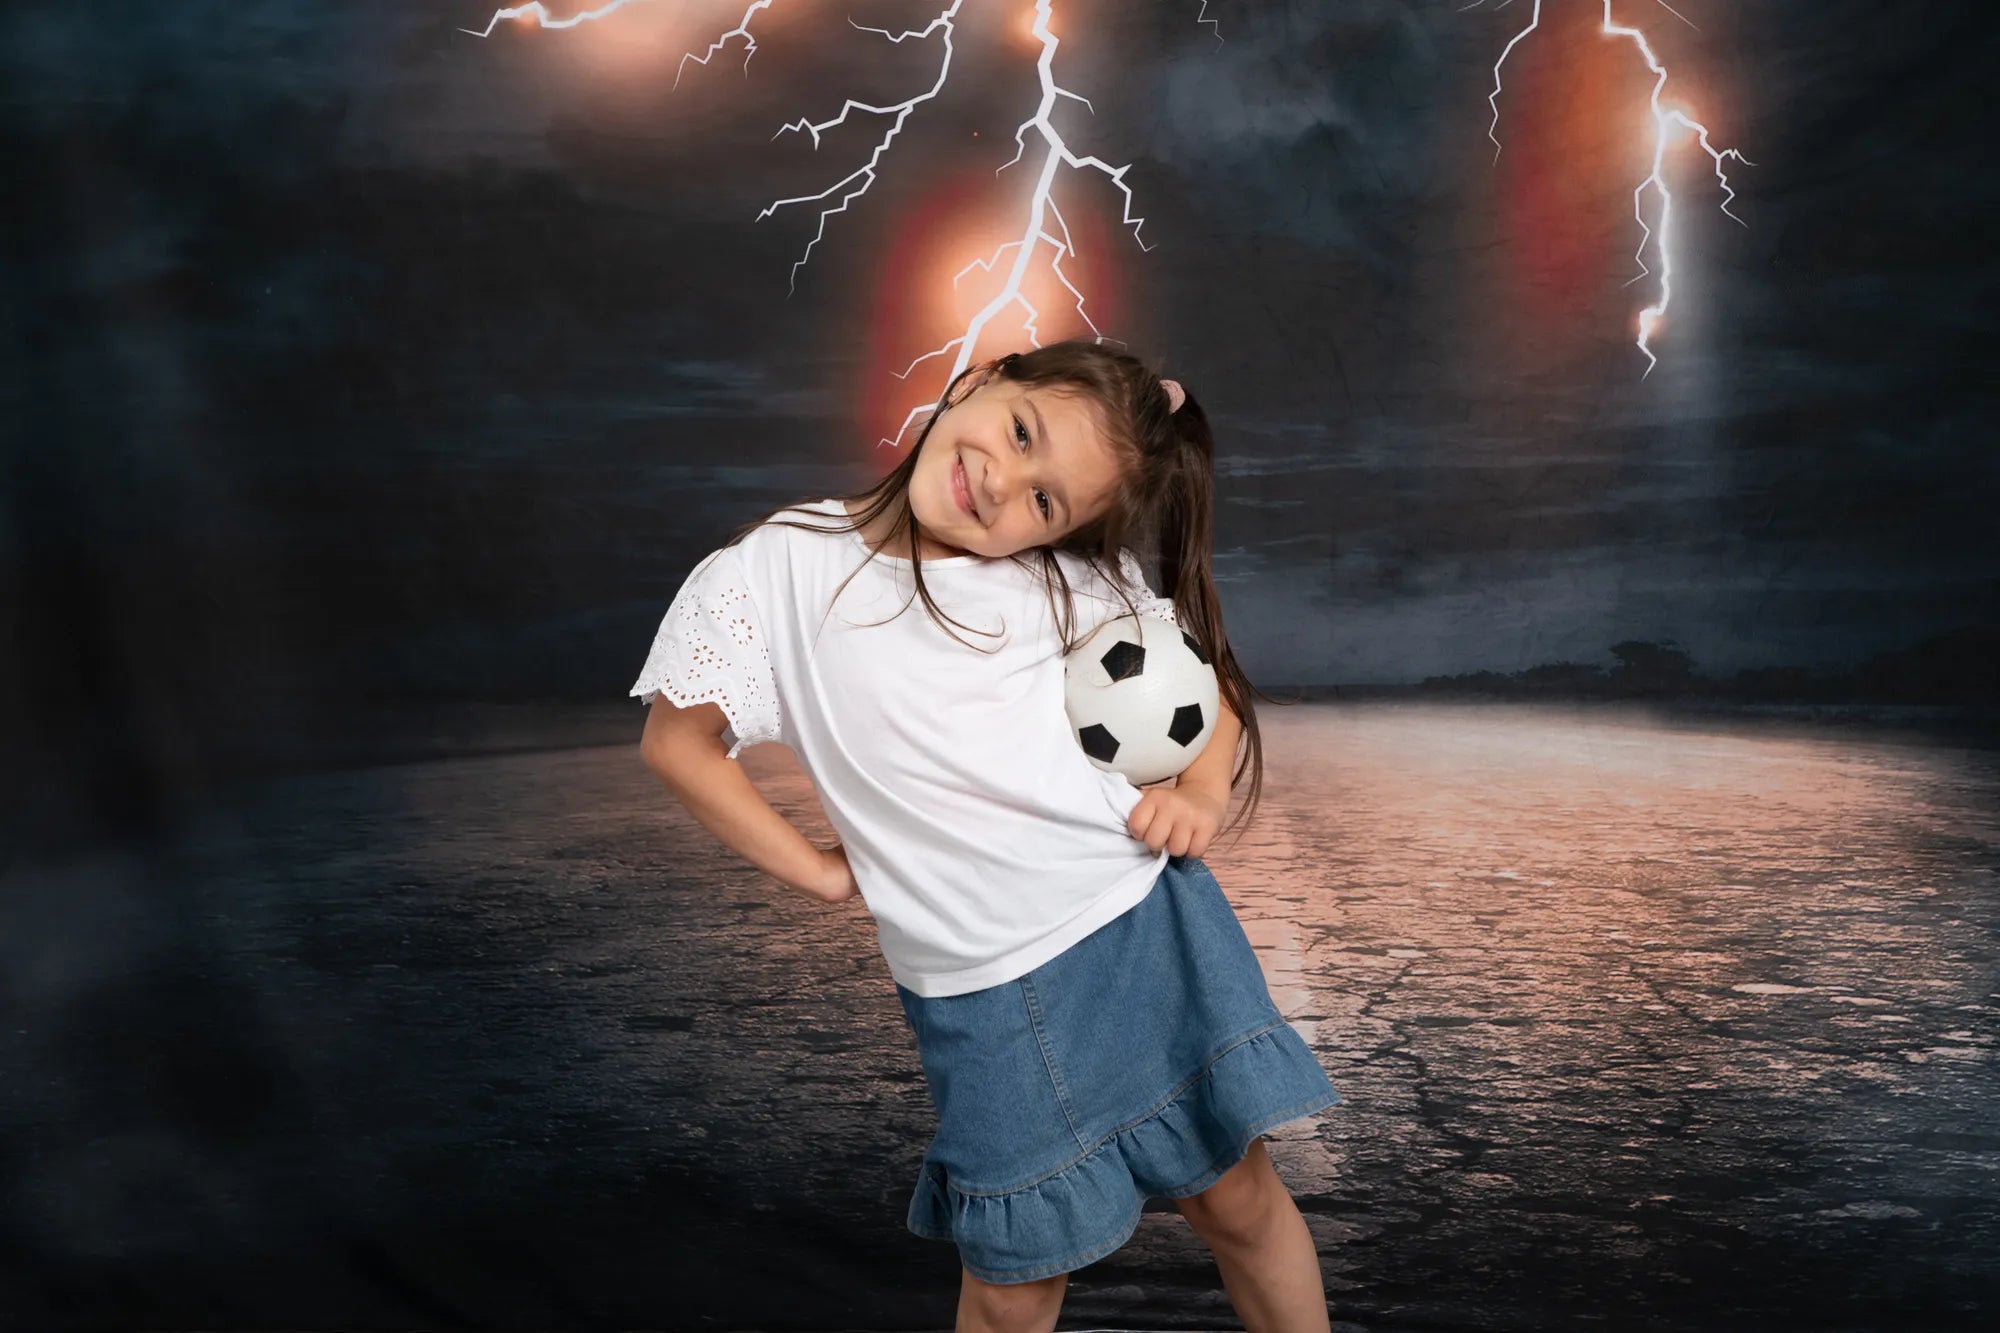 RTS Kate Dark Sky Road Backdrop for Sports Photography designed by Jerry_Sina